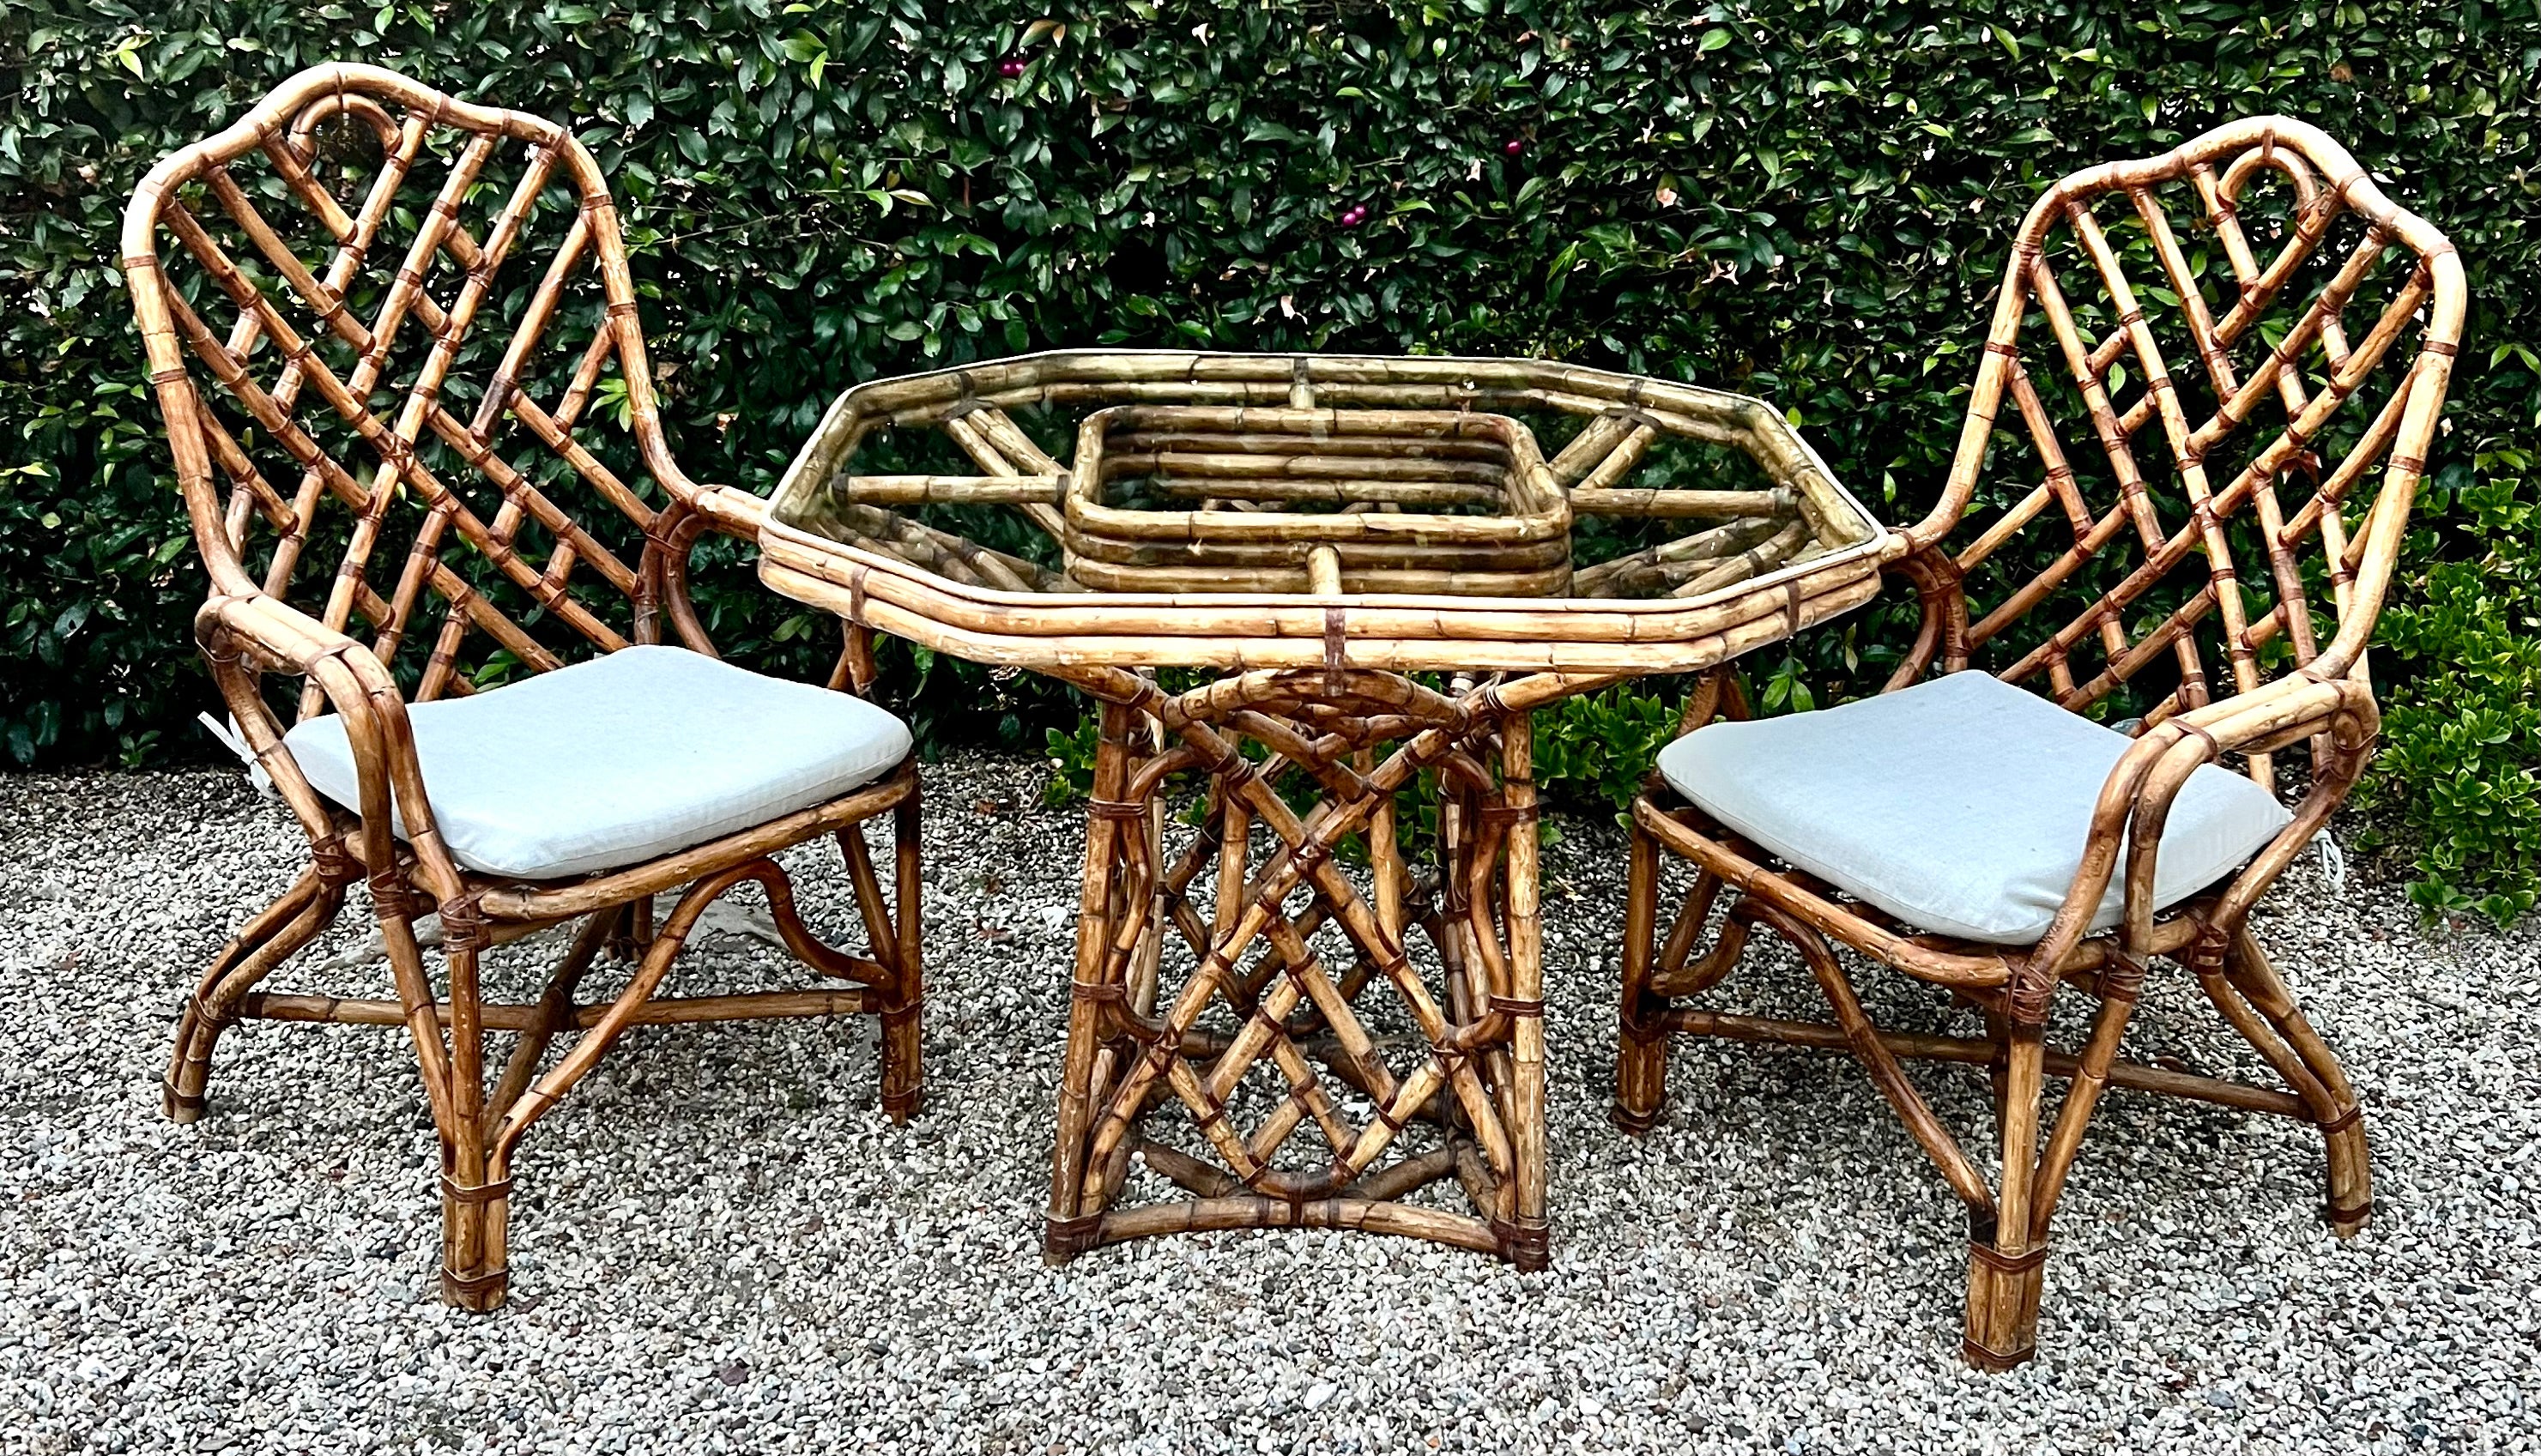 A wonderfully detailed Bamboo Dining Table with Two matching chairs in the style of Louis Sognot.  The set is well made, sturdy and in very good condition.   The lashing is leather and also in very good condition.  

The set would be a compliment to